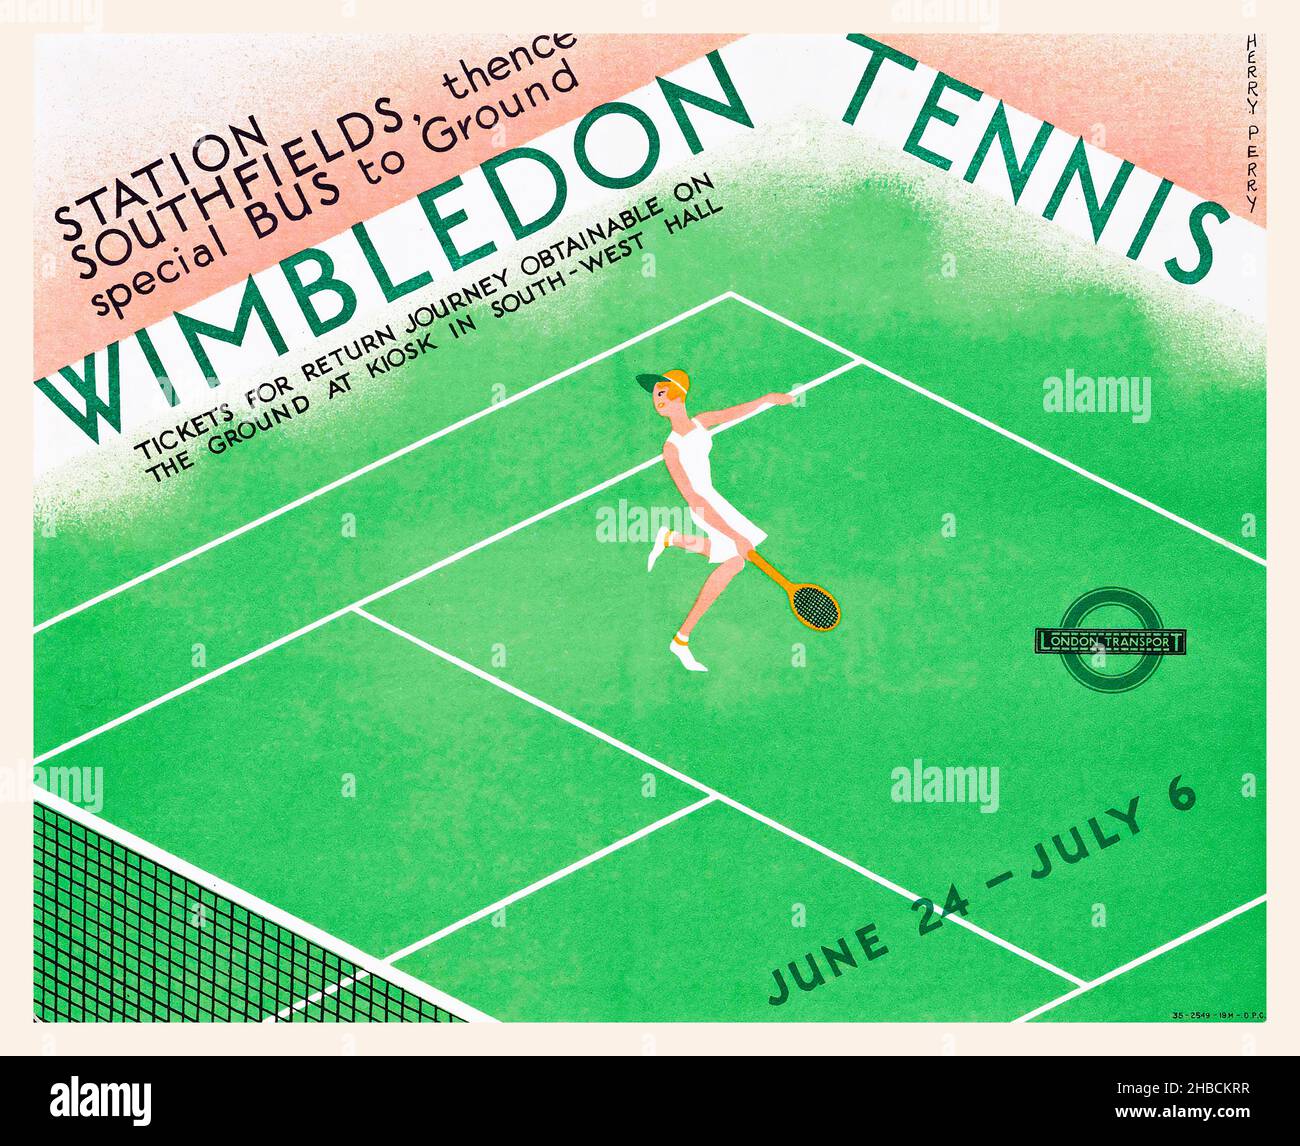 LONDON TRANSPORT POSTER POSTCARD ~ WIMBLEDON FROM JUNE 22 ~ HERRY PERRY 1931 